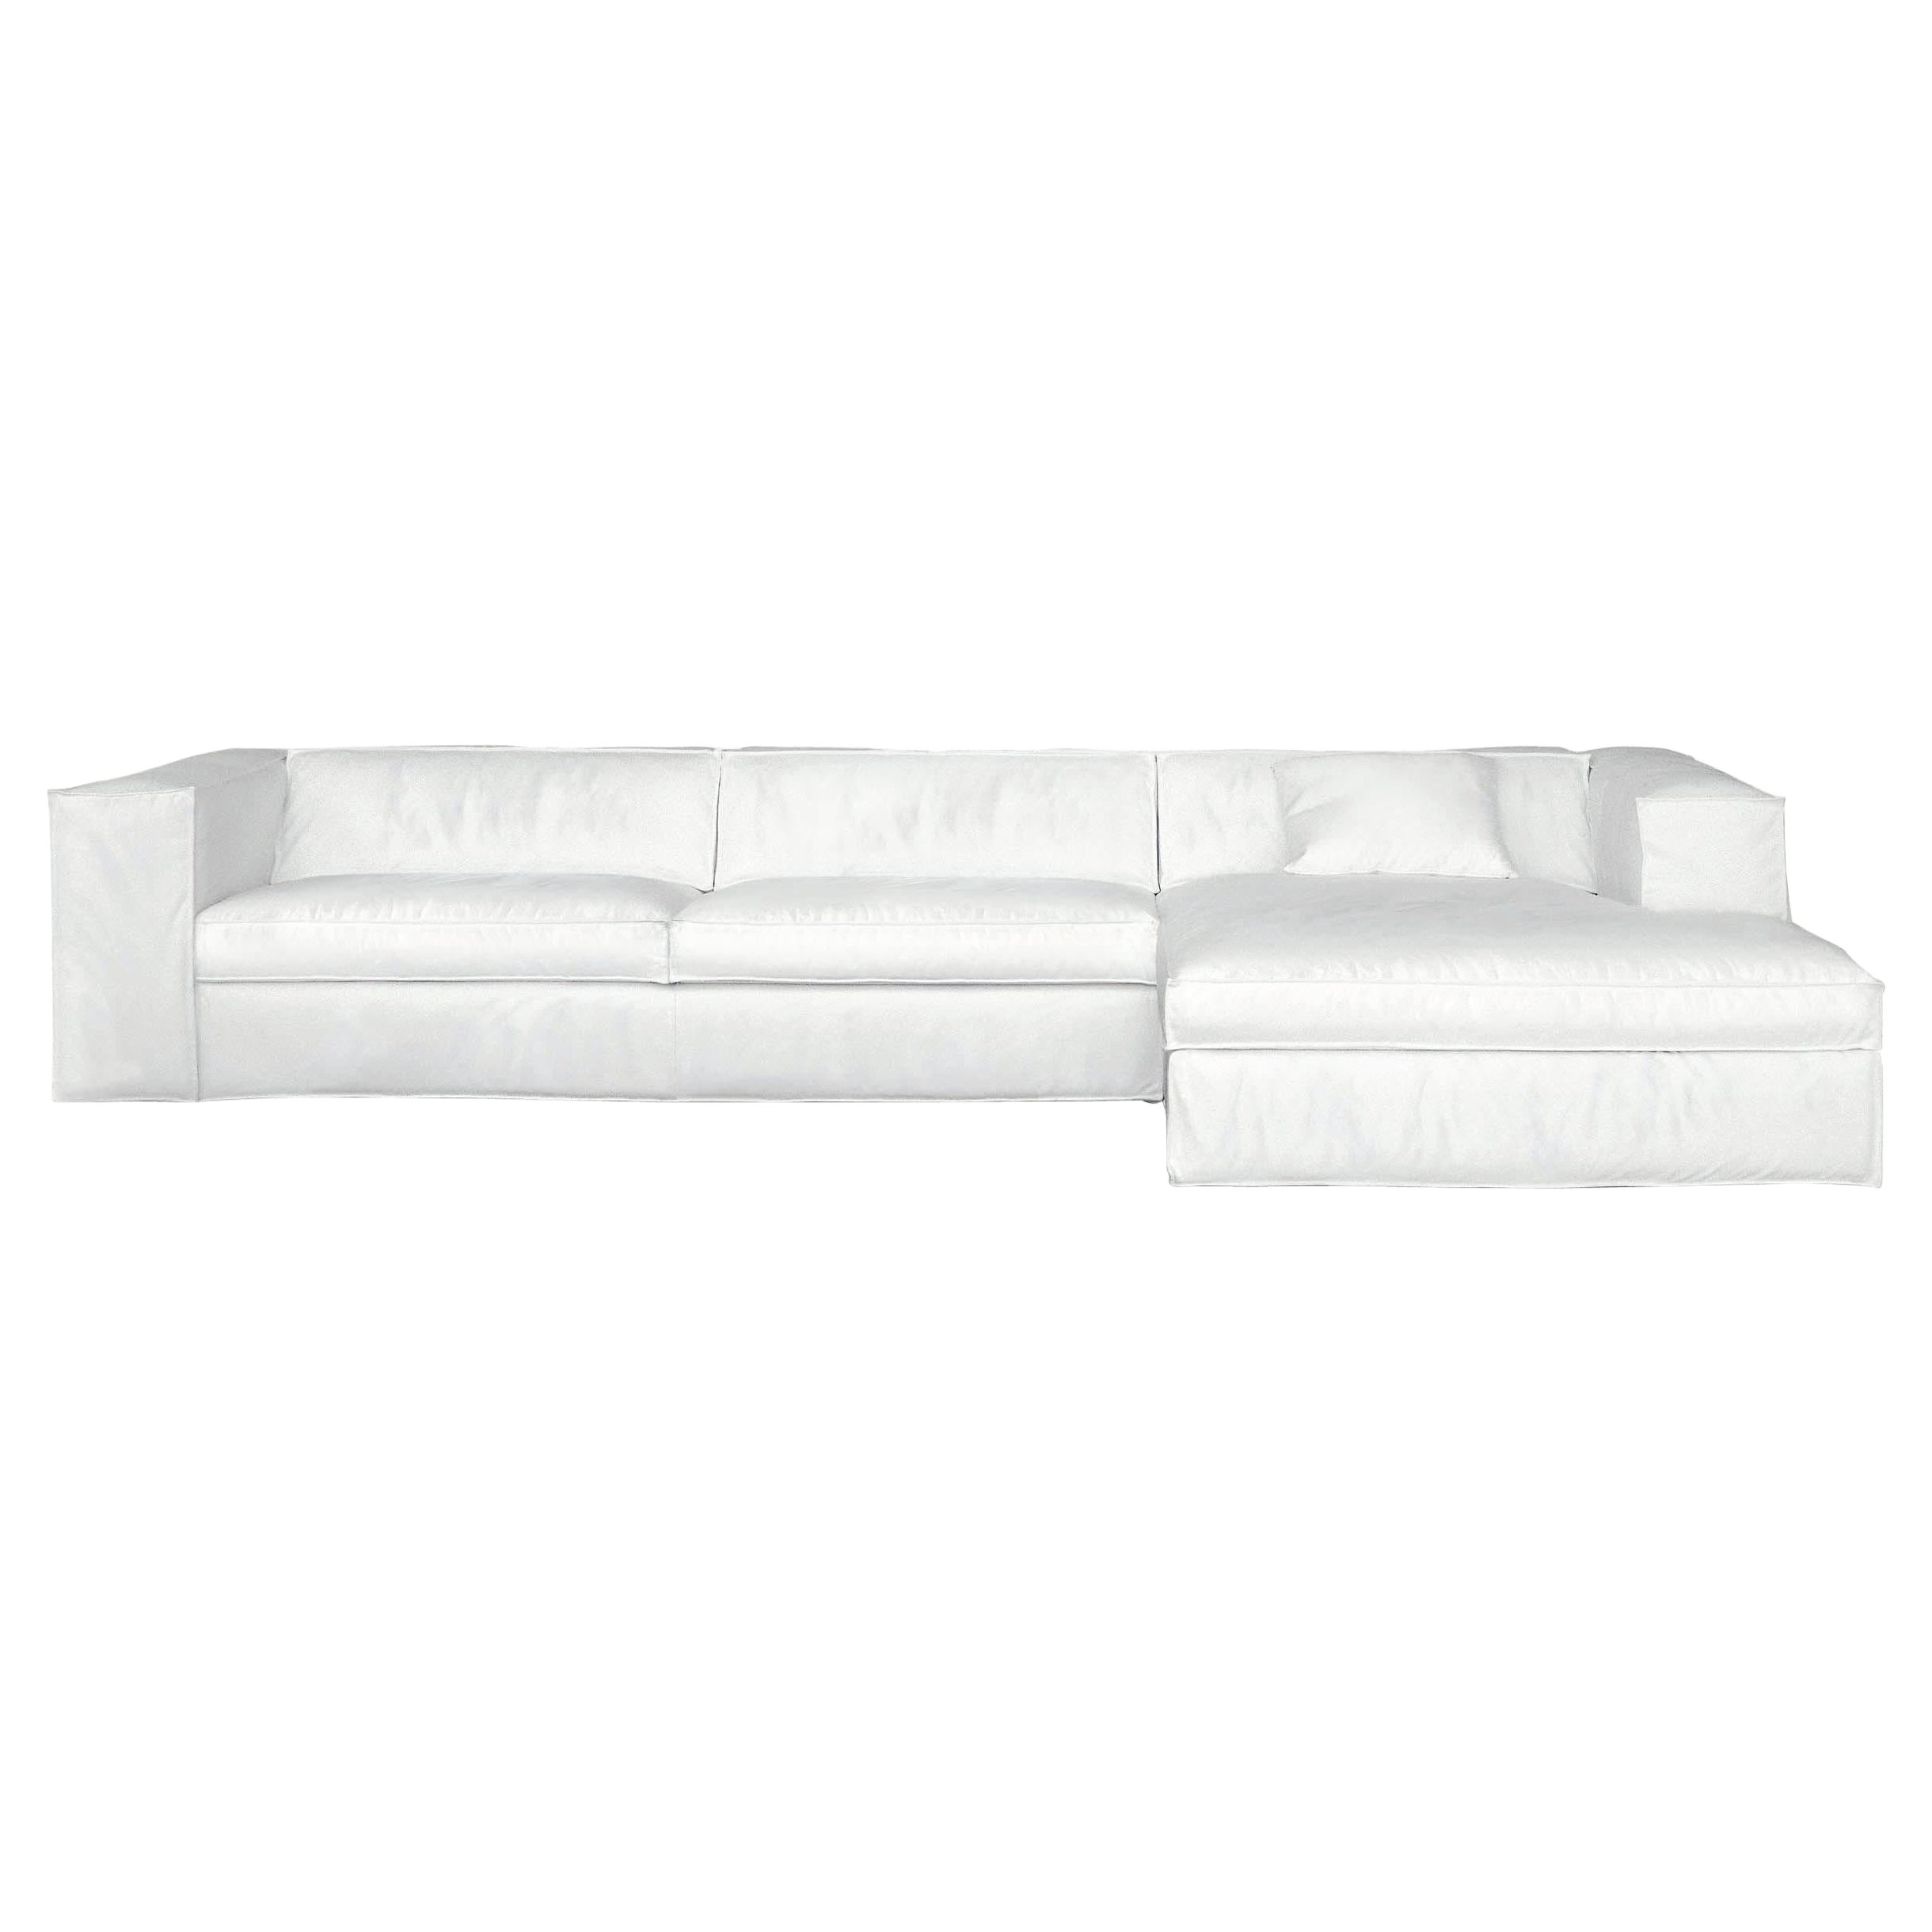 Up Extra Large Modular Sofa in Kami White Upholstery by Giuseppe Viganò For Sale